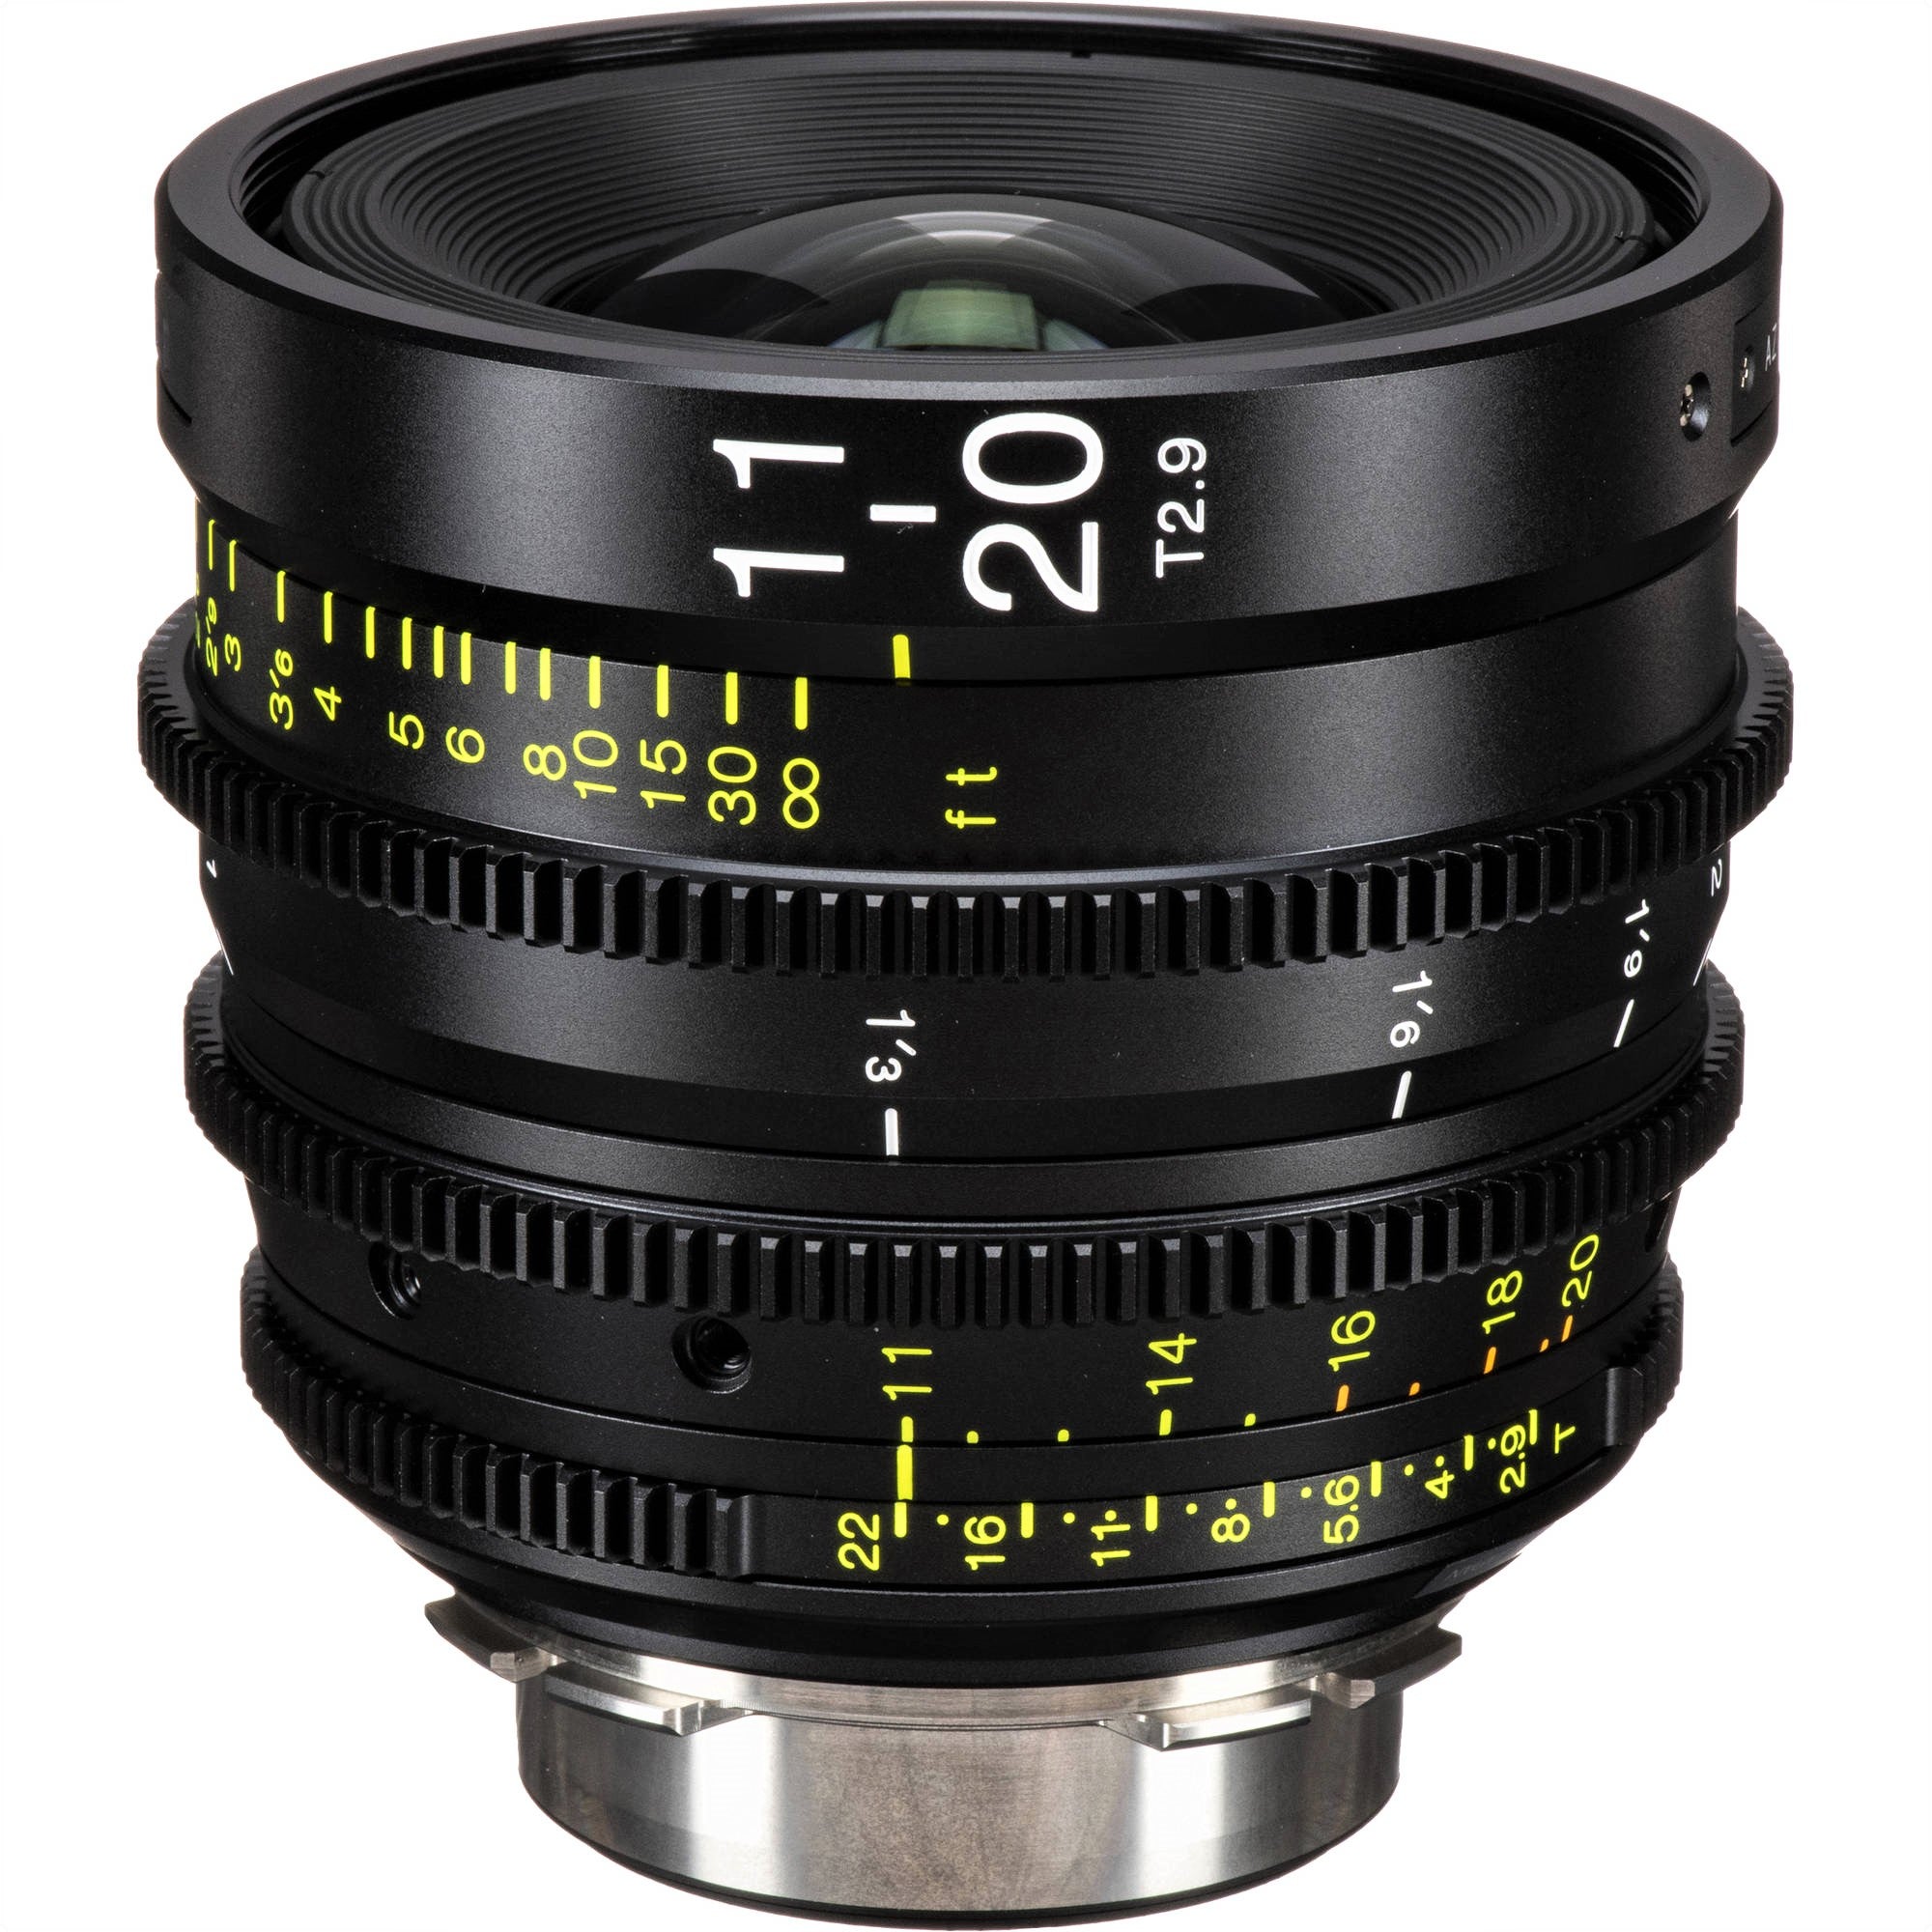 Tokina Cinema ATX 11-20mm T2.9 Wide-Angle Zoom Lens for PL Mount